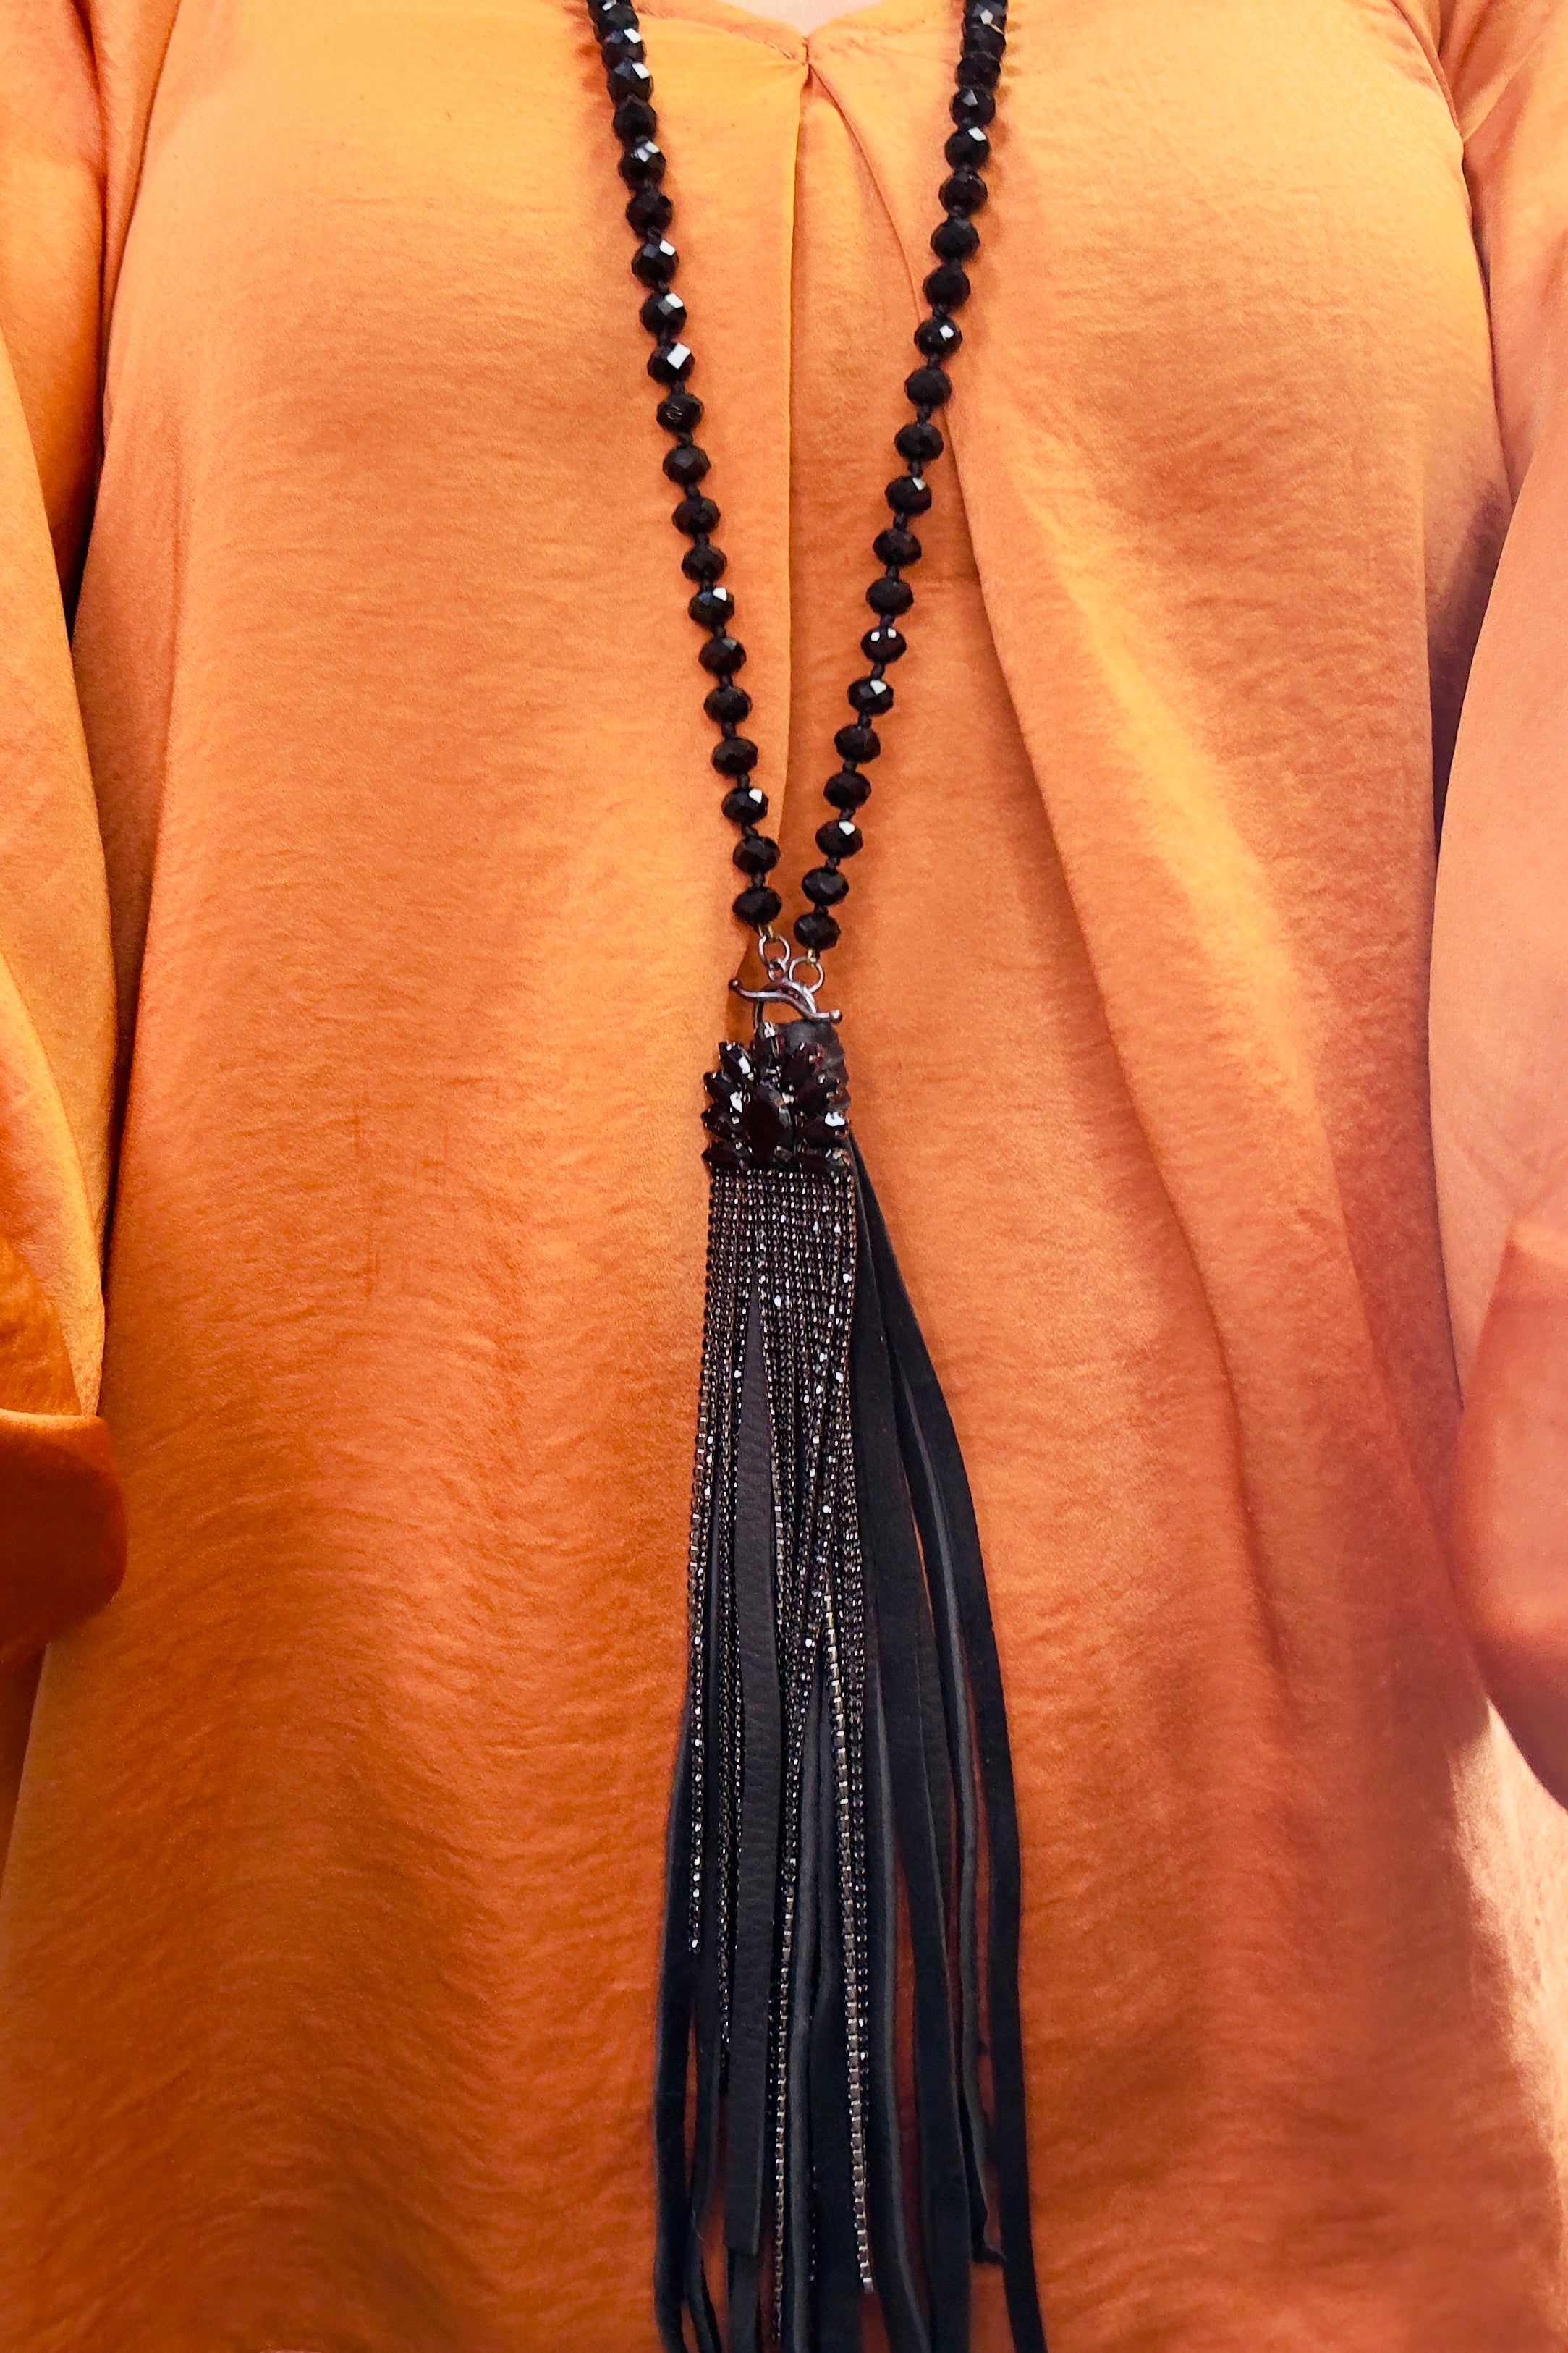 Black Crystal Necklace with Leather Tassel